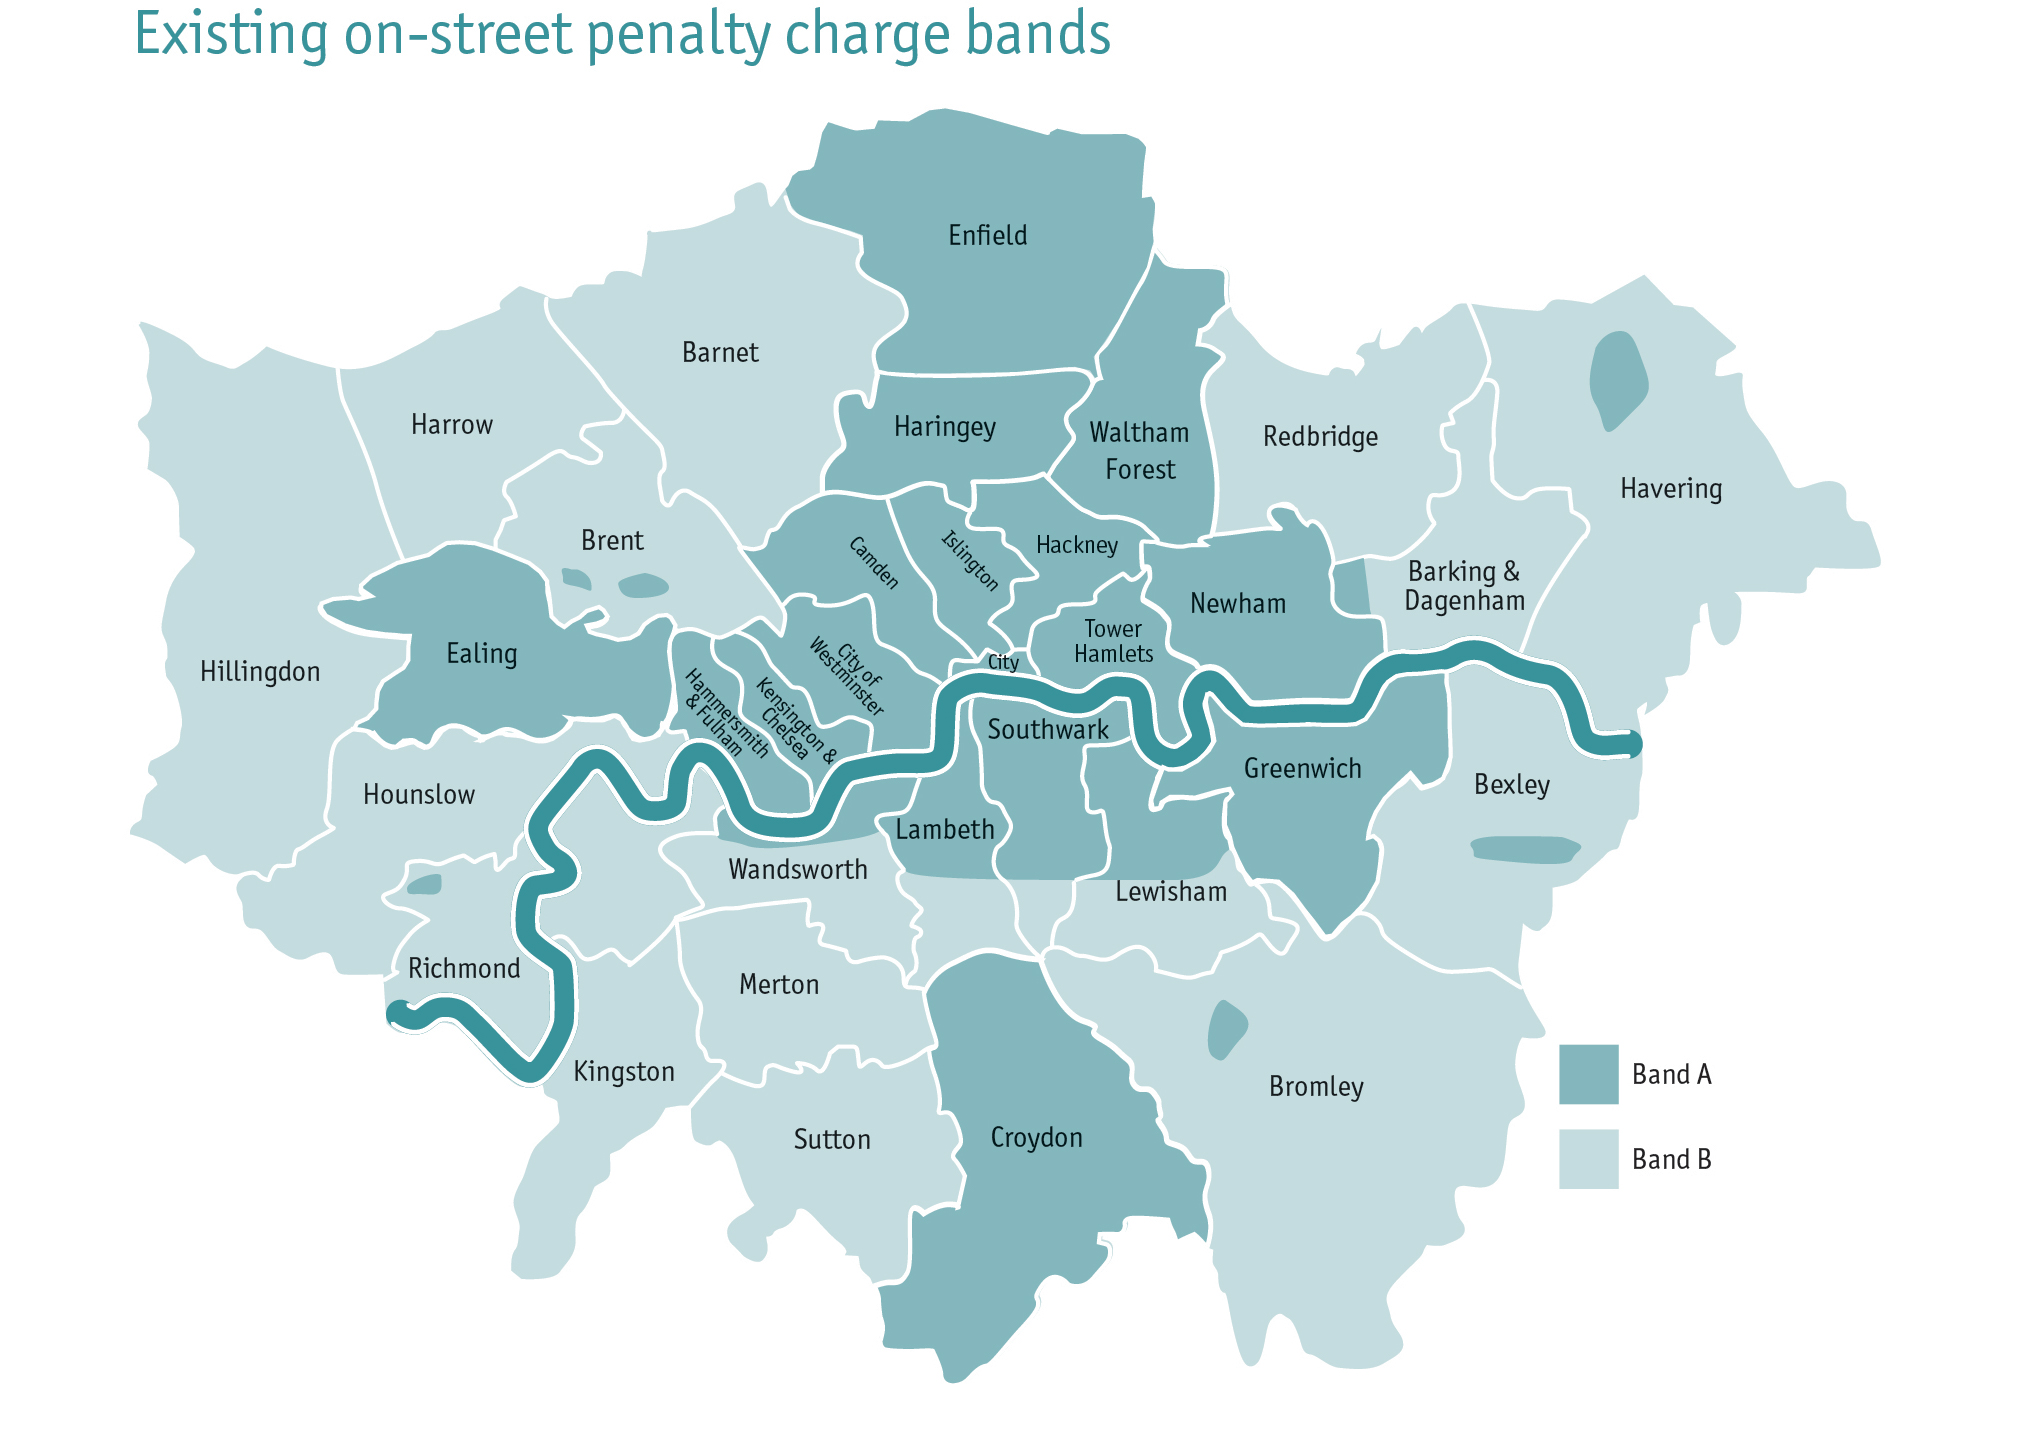 Exiting on-street penalty charge bands London map 2021